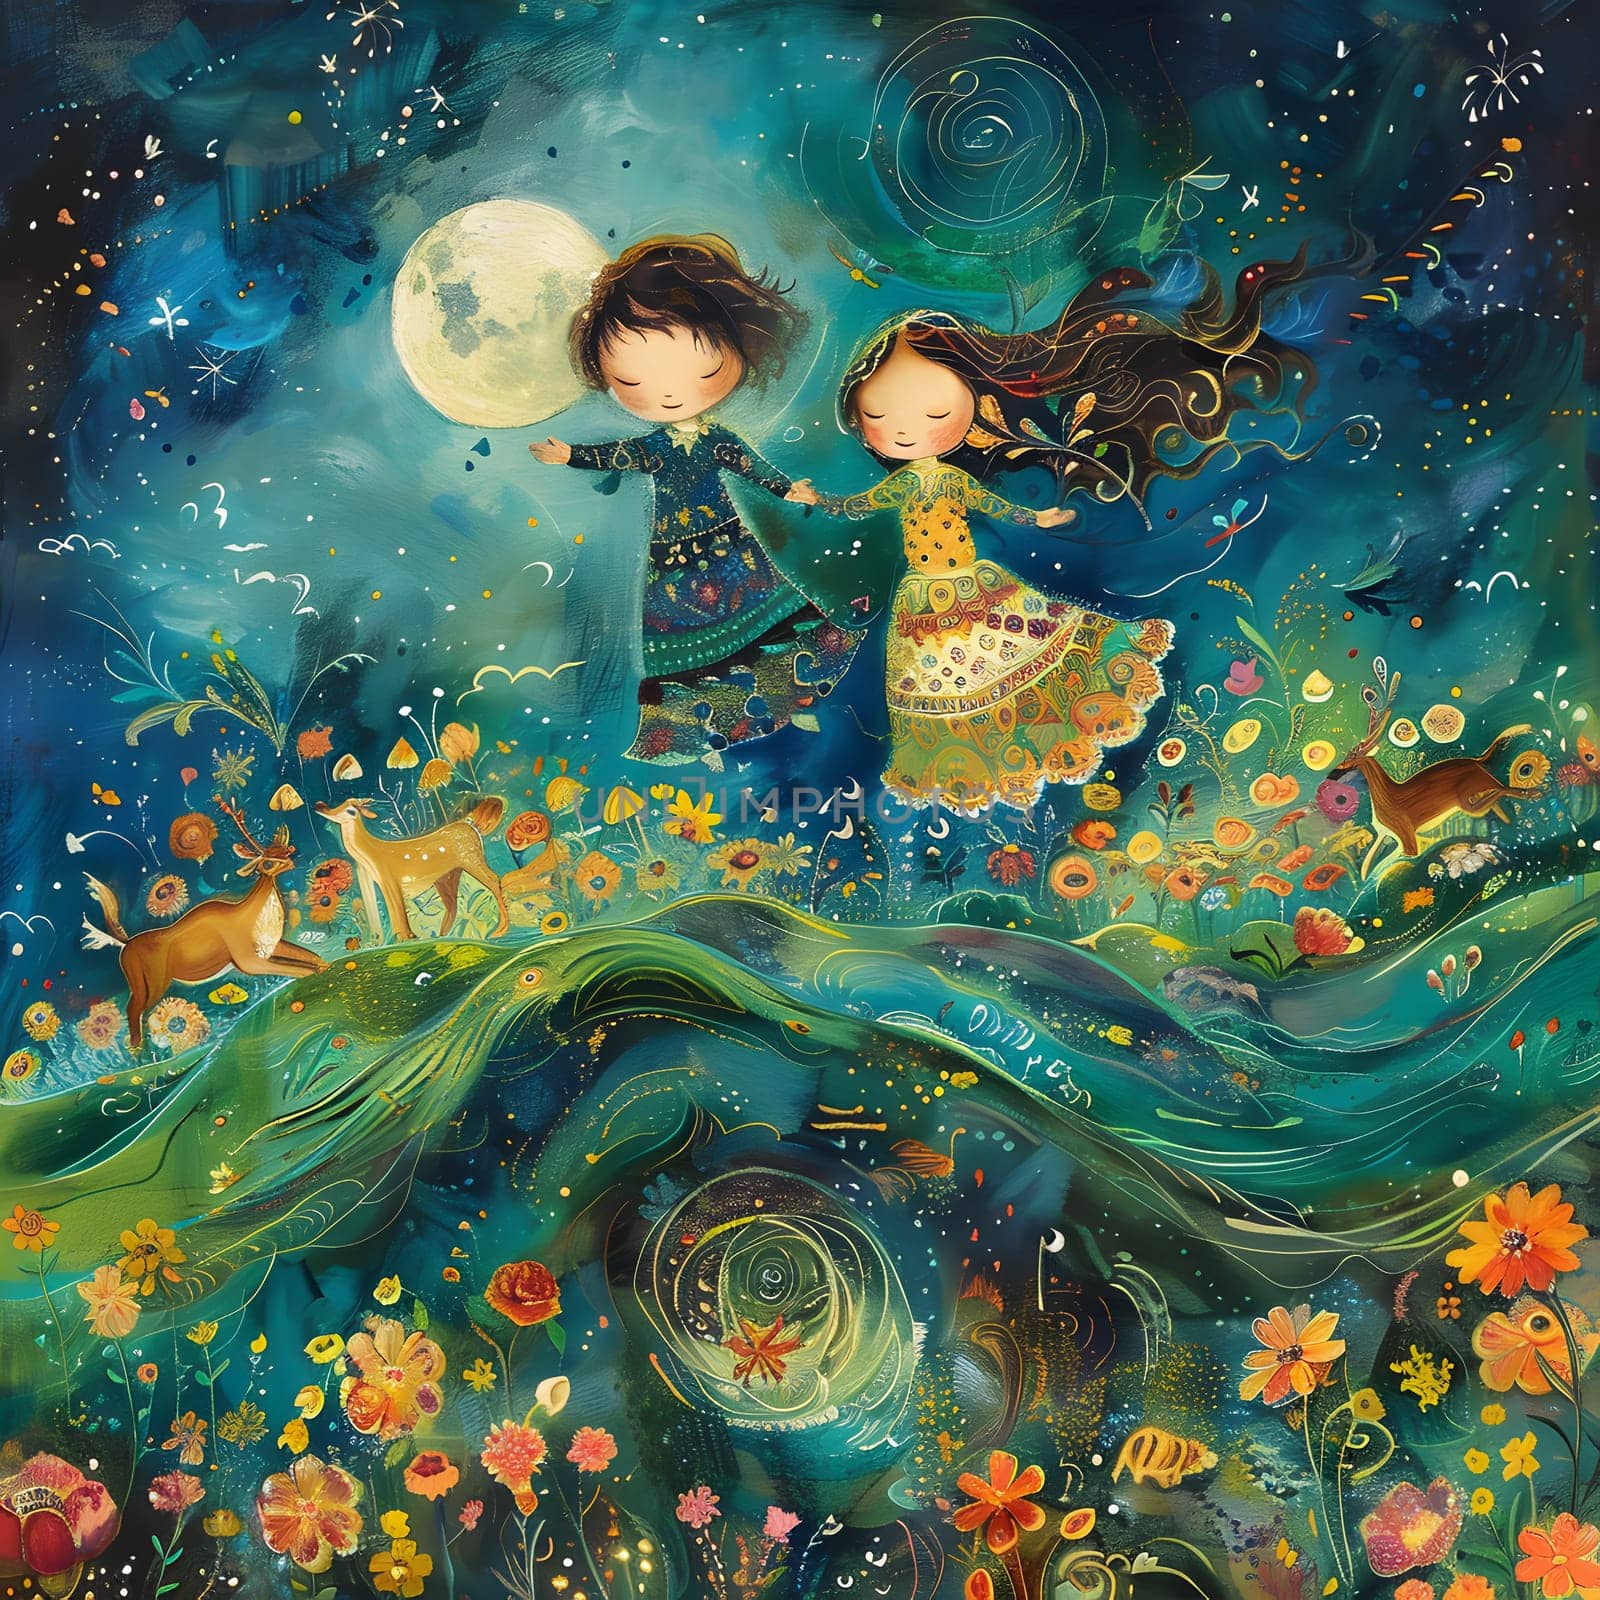 A mesmerizing painting of a boy and a girl crossing a river at night, the aqua reflecting the stars above, creating a mythical scene of enchantment